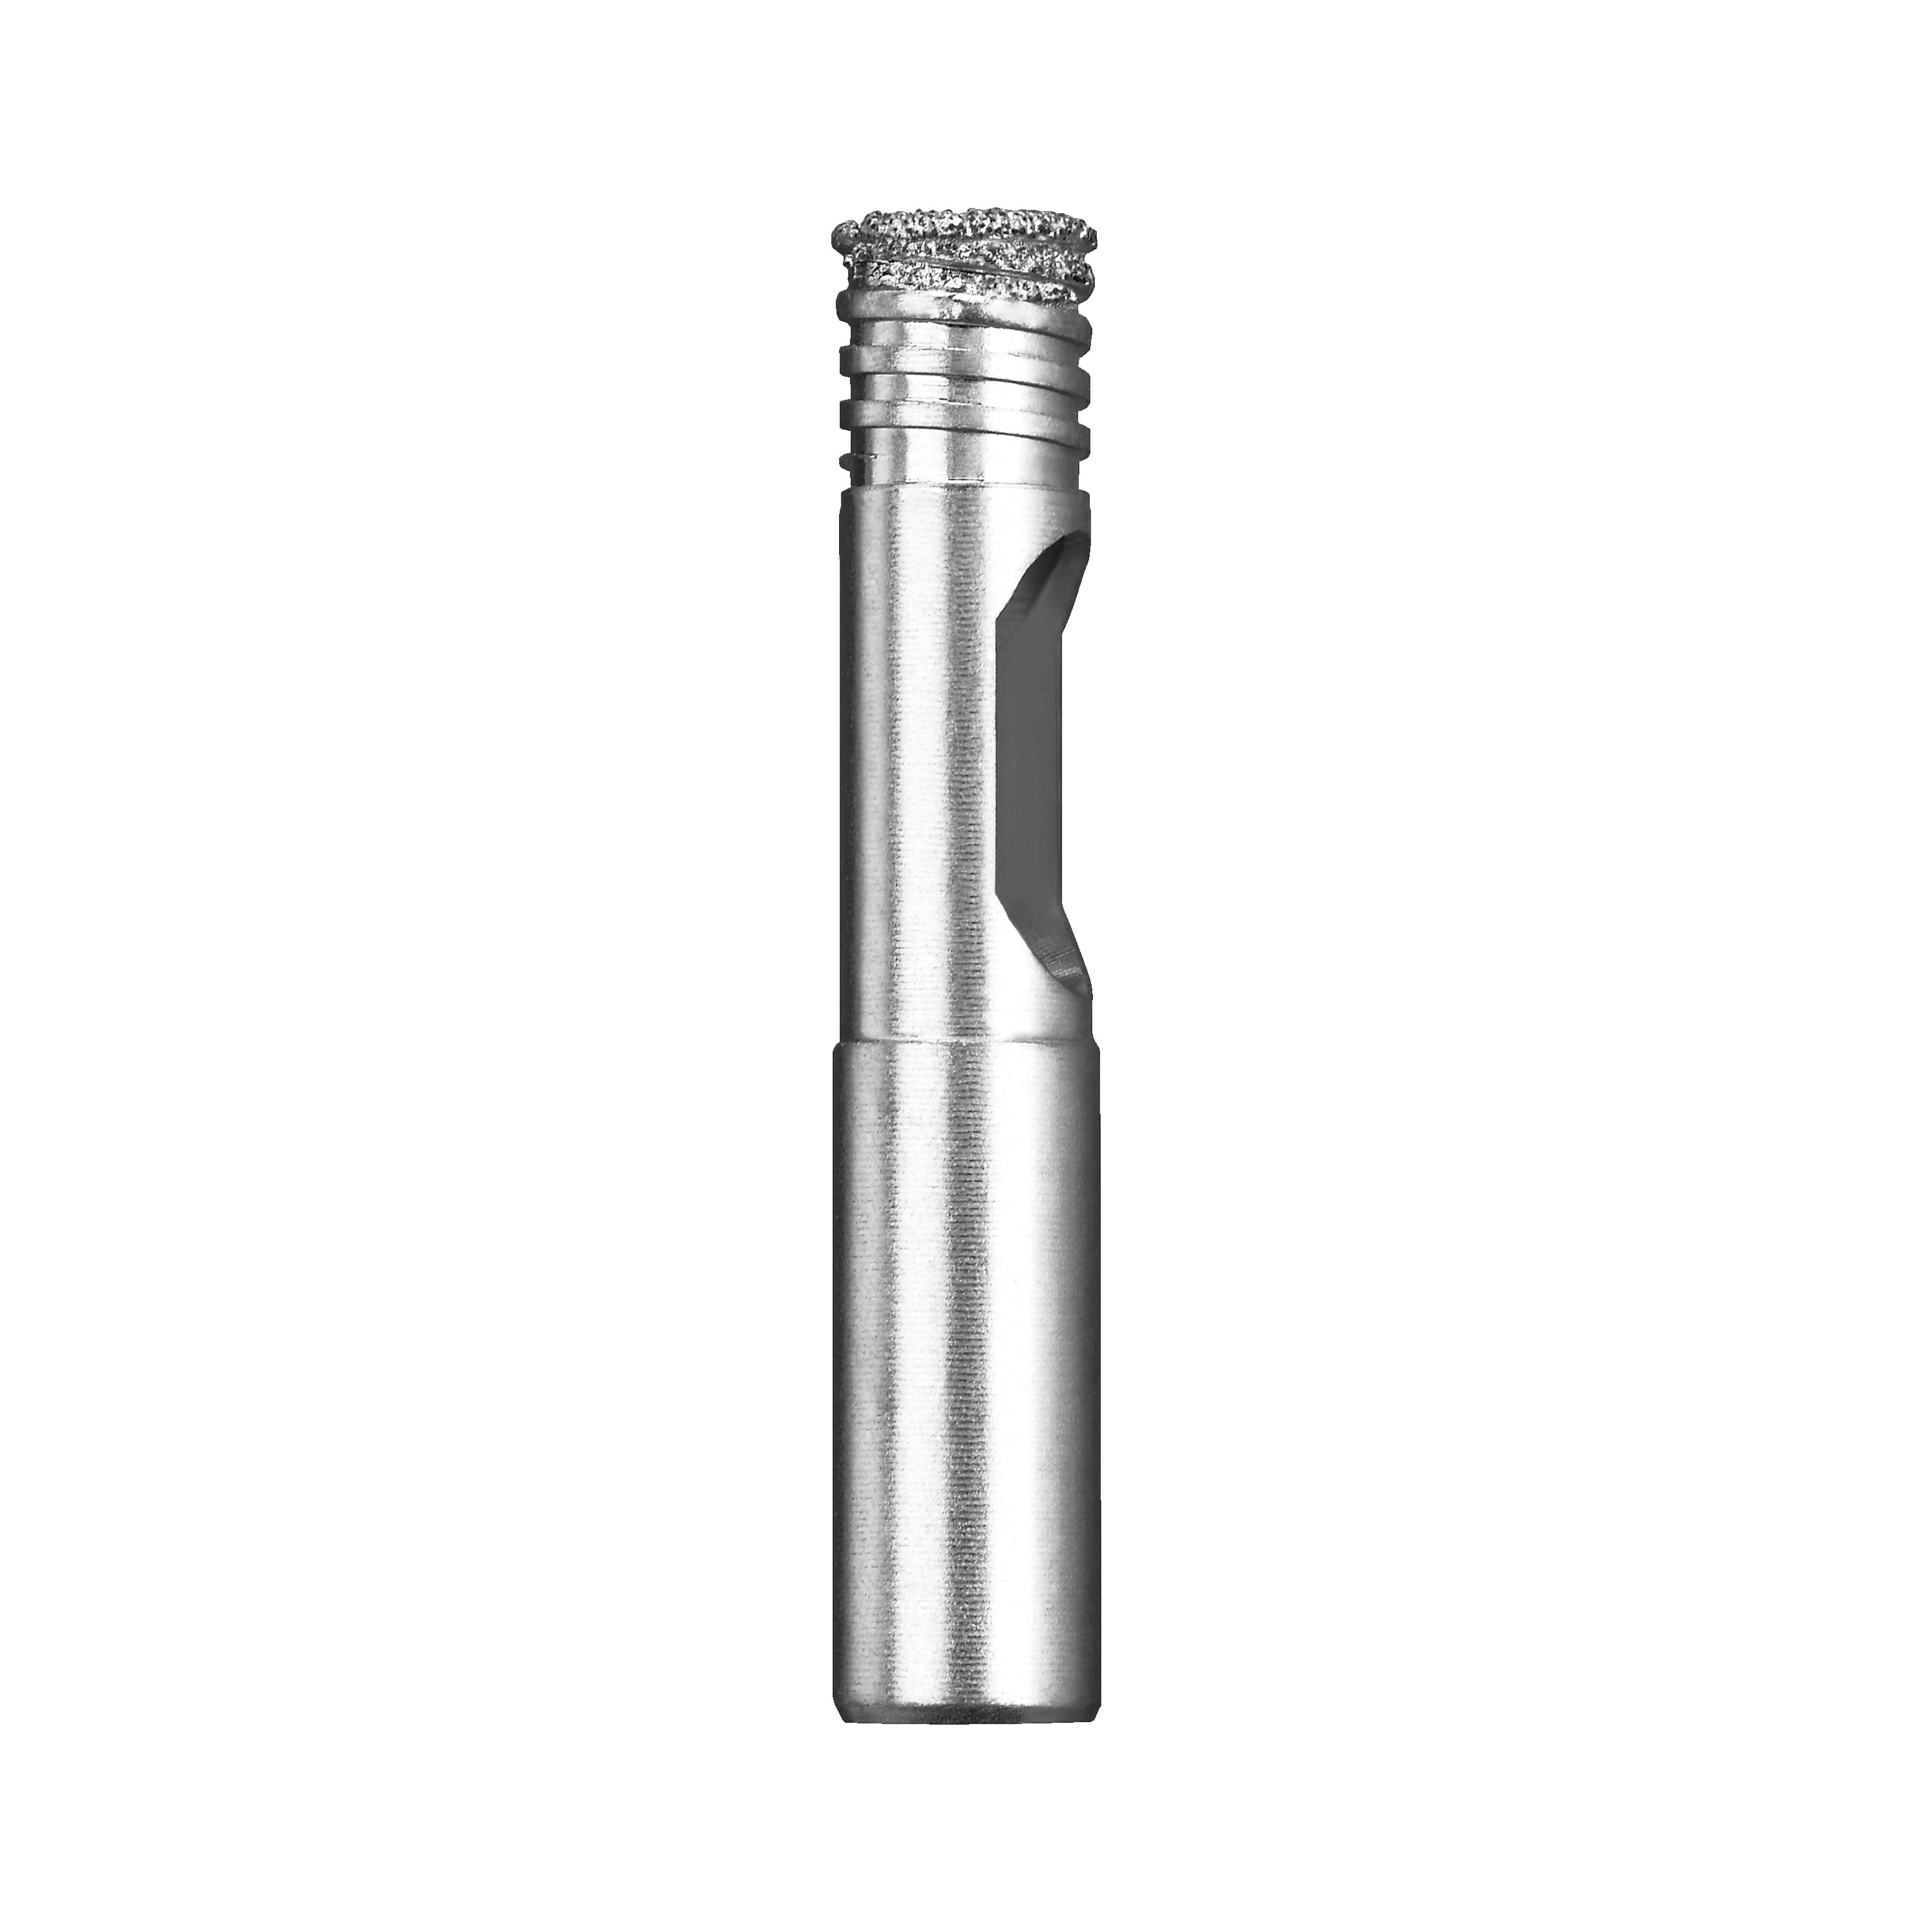 Profile of Tile Drill Bits Family. 